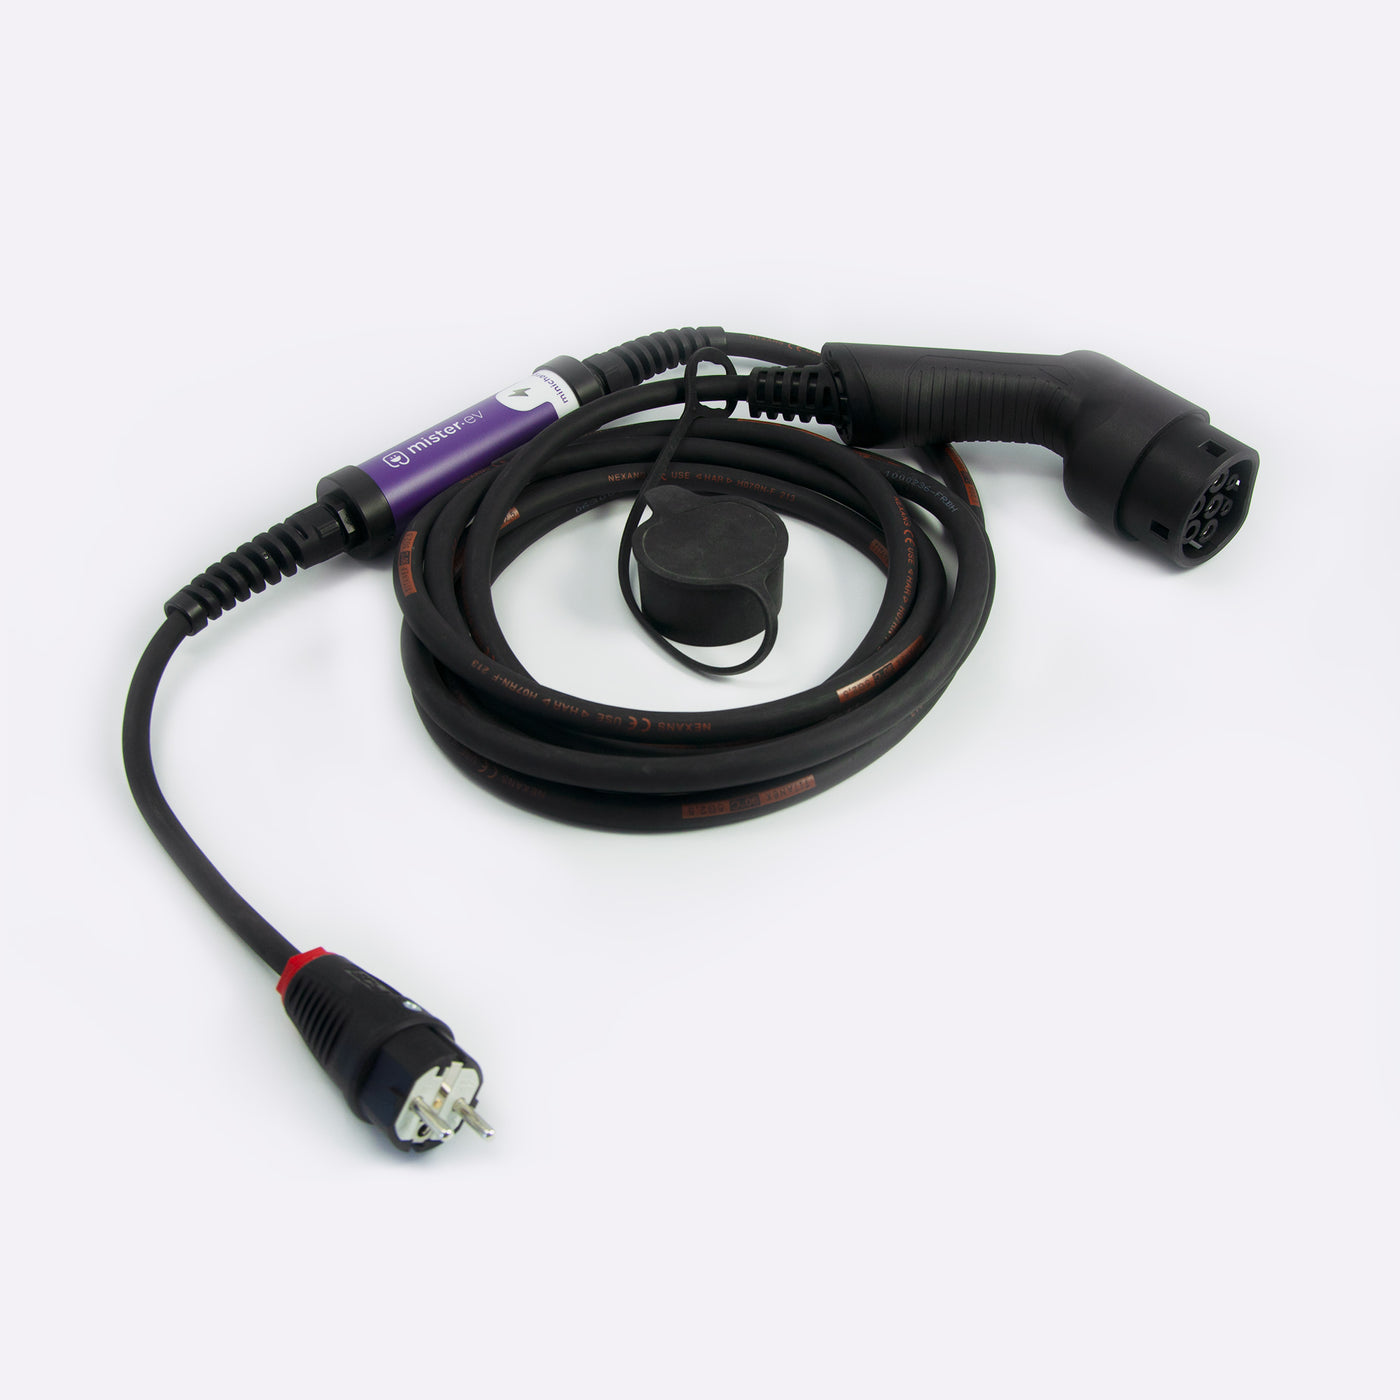 MINICHARGER - Charging cable for domestic power outlet - Type 2